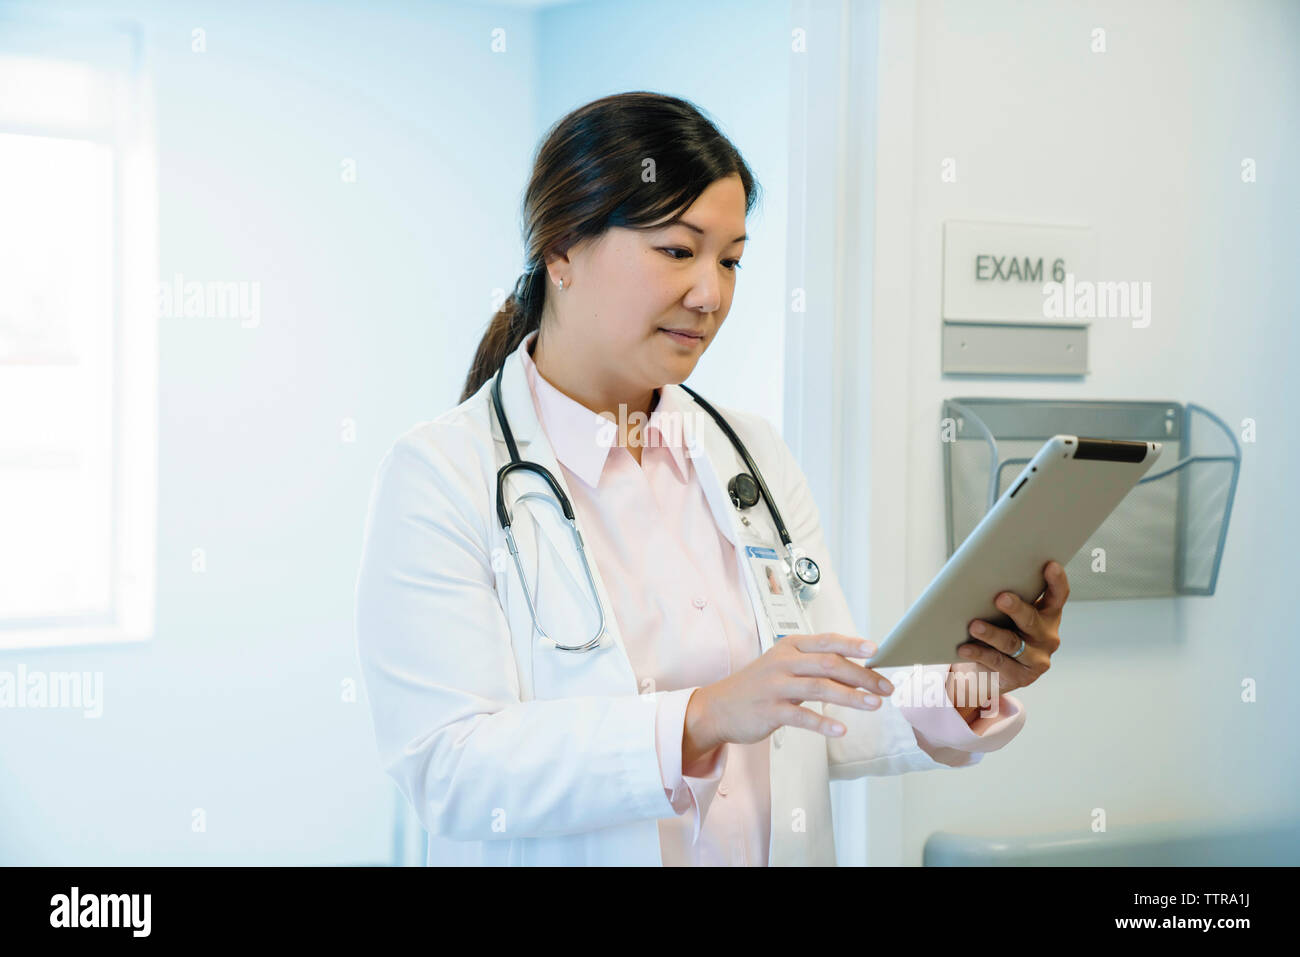 Female doctor looking at tablet computer while standing in hospital corridor Stock Photo